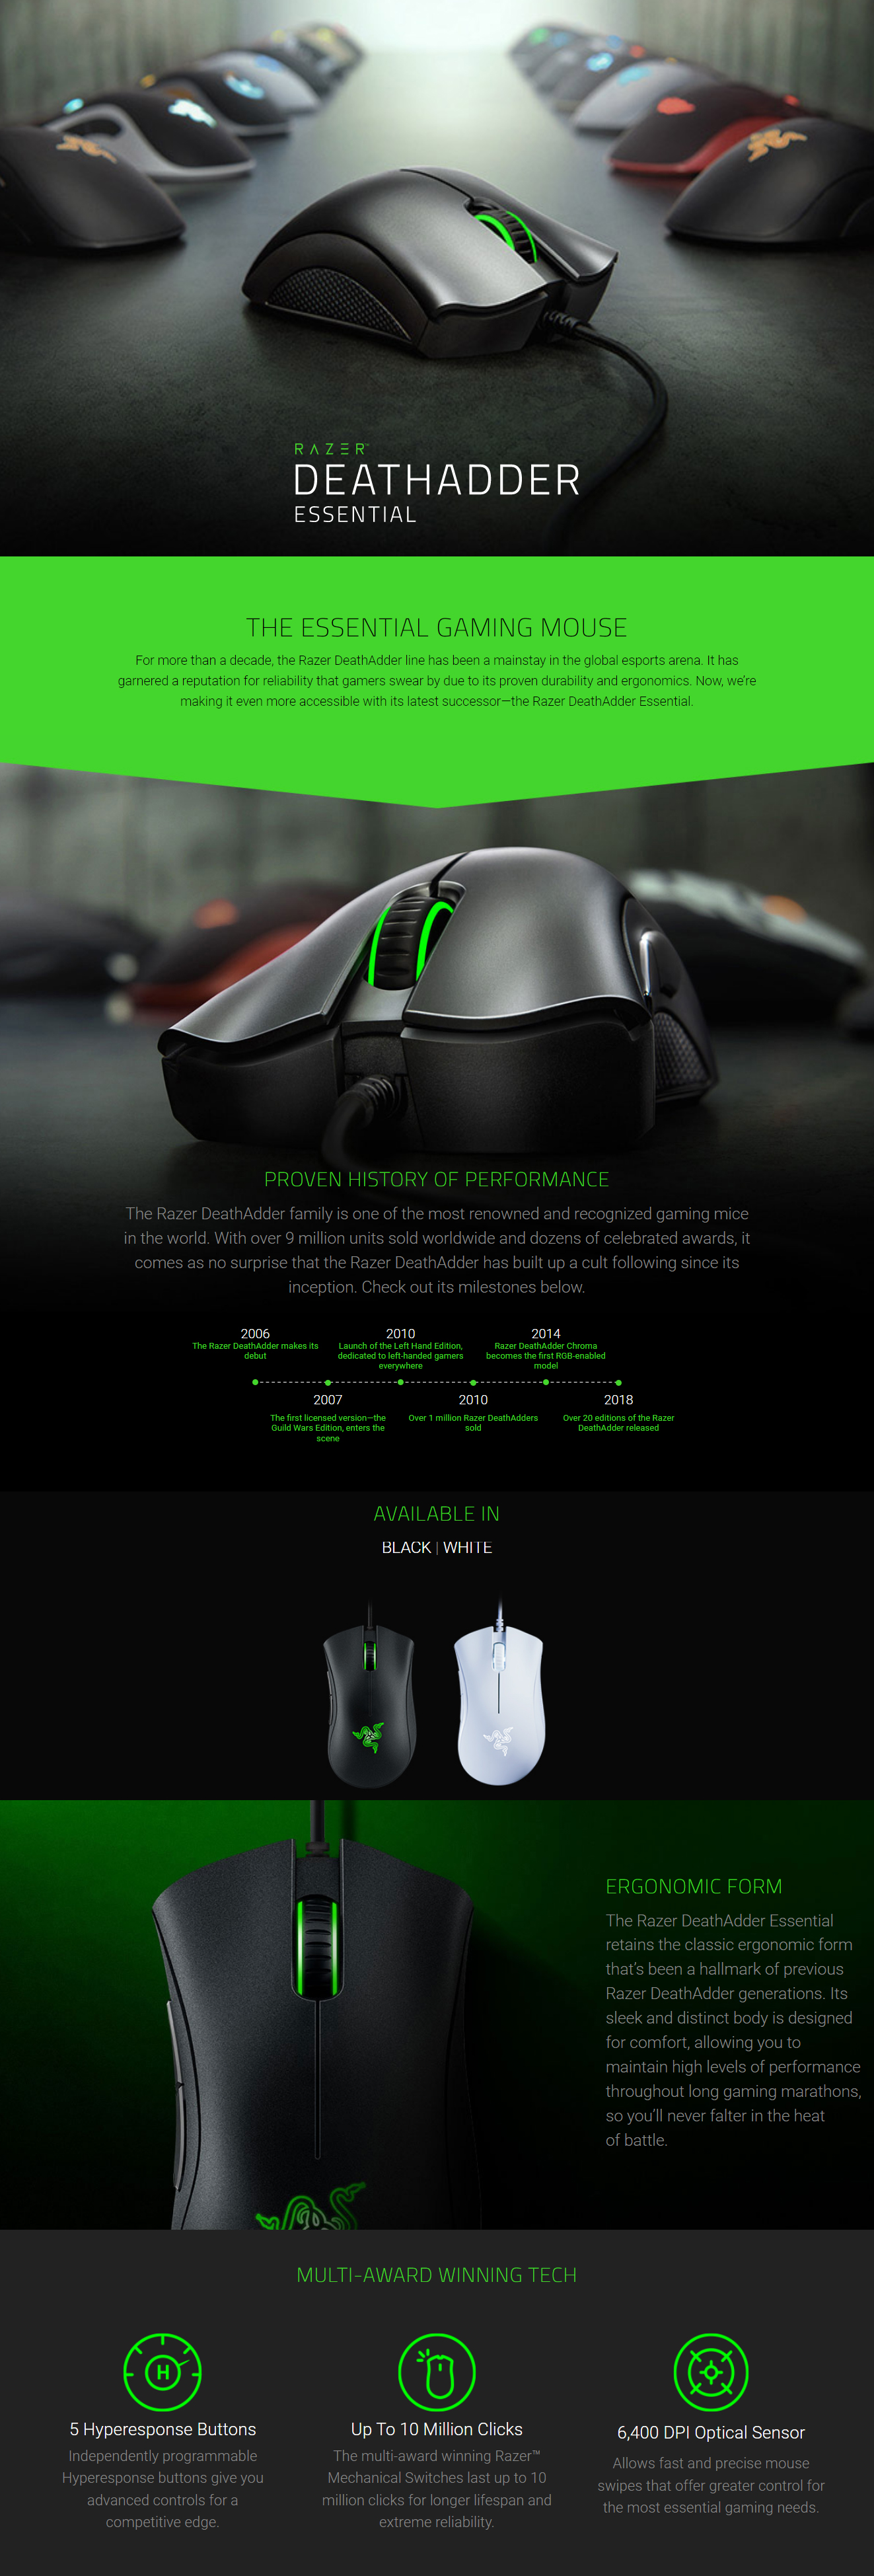 Right Handed Gaming Mouse - Razer DeathAdder Essential